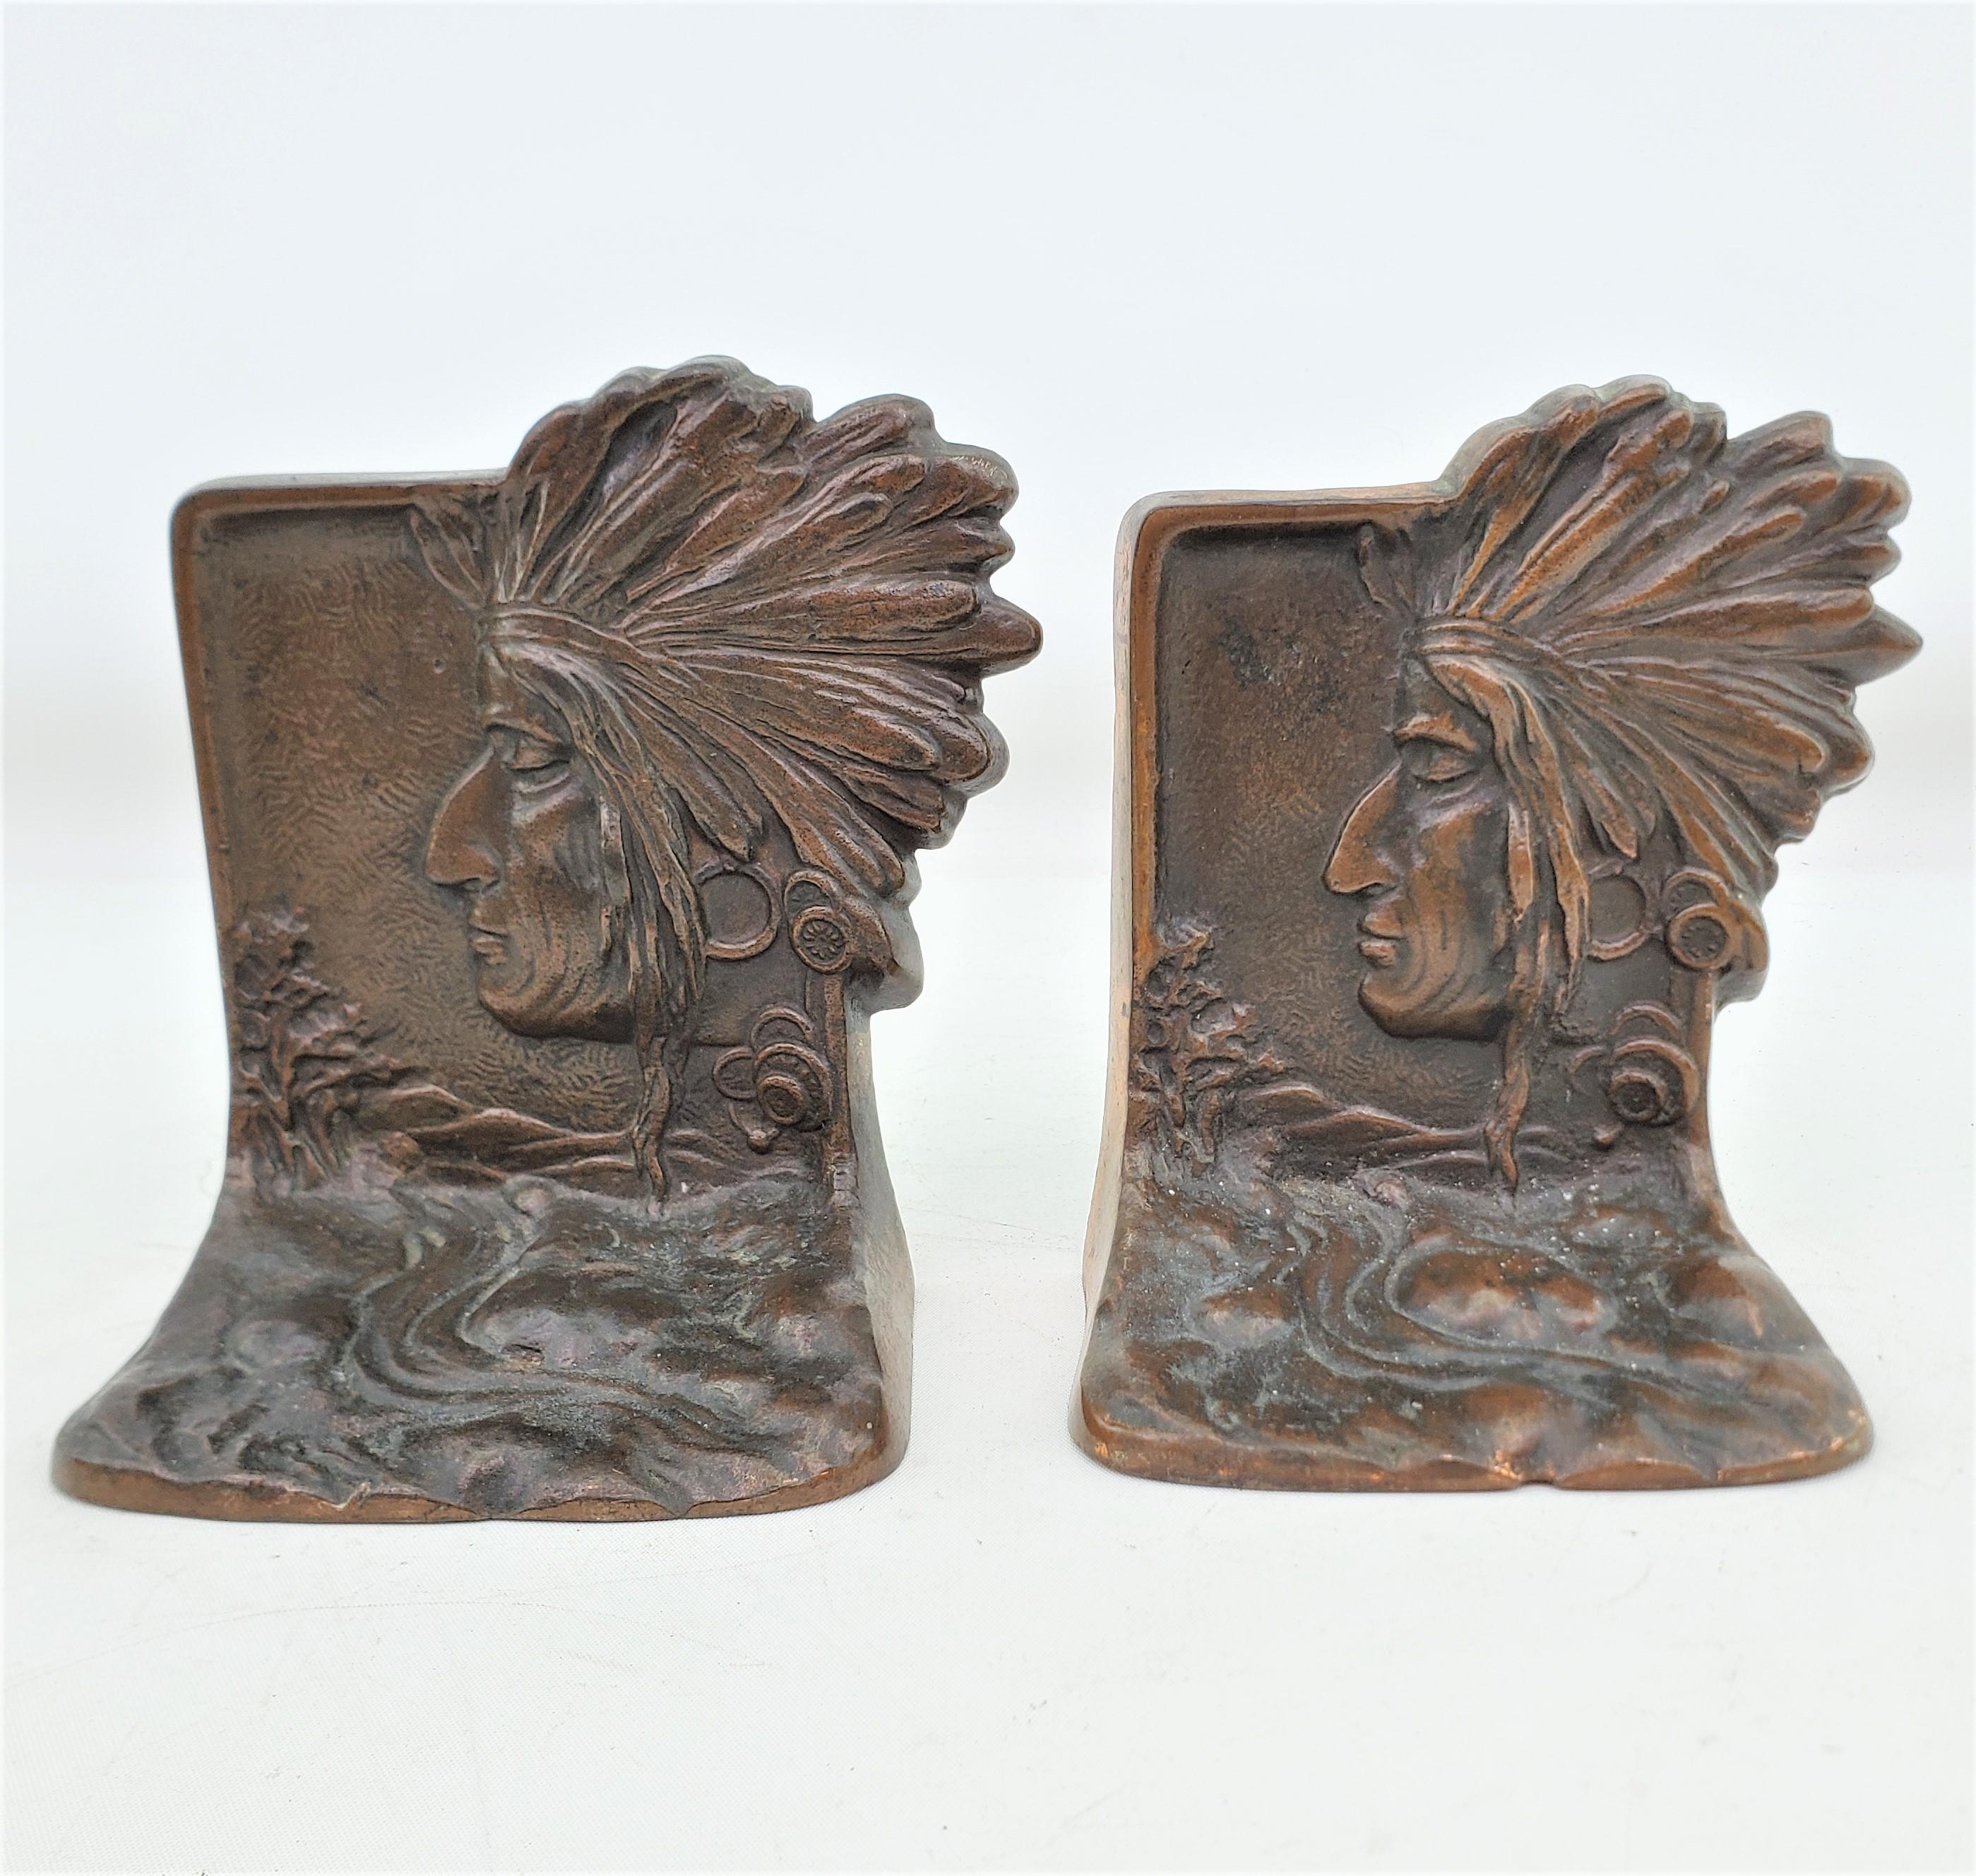 American Antique Art Deco Cast & Patinated Bookends Depicting an Indigenous Warrior For Sale